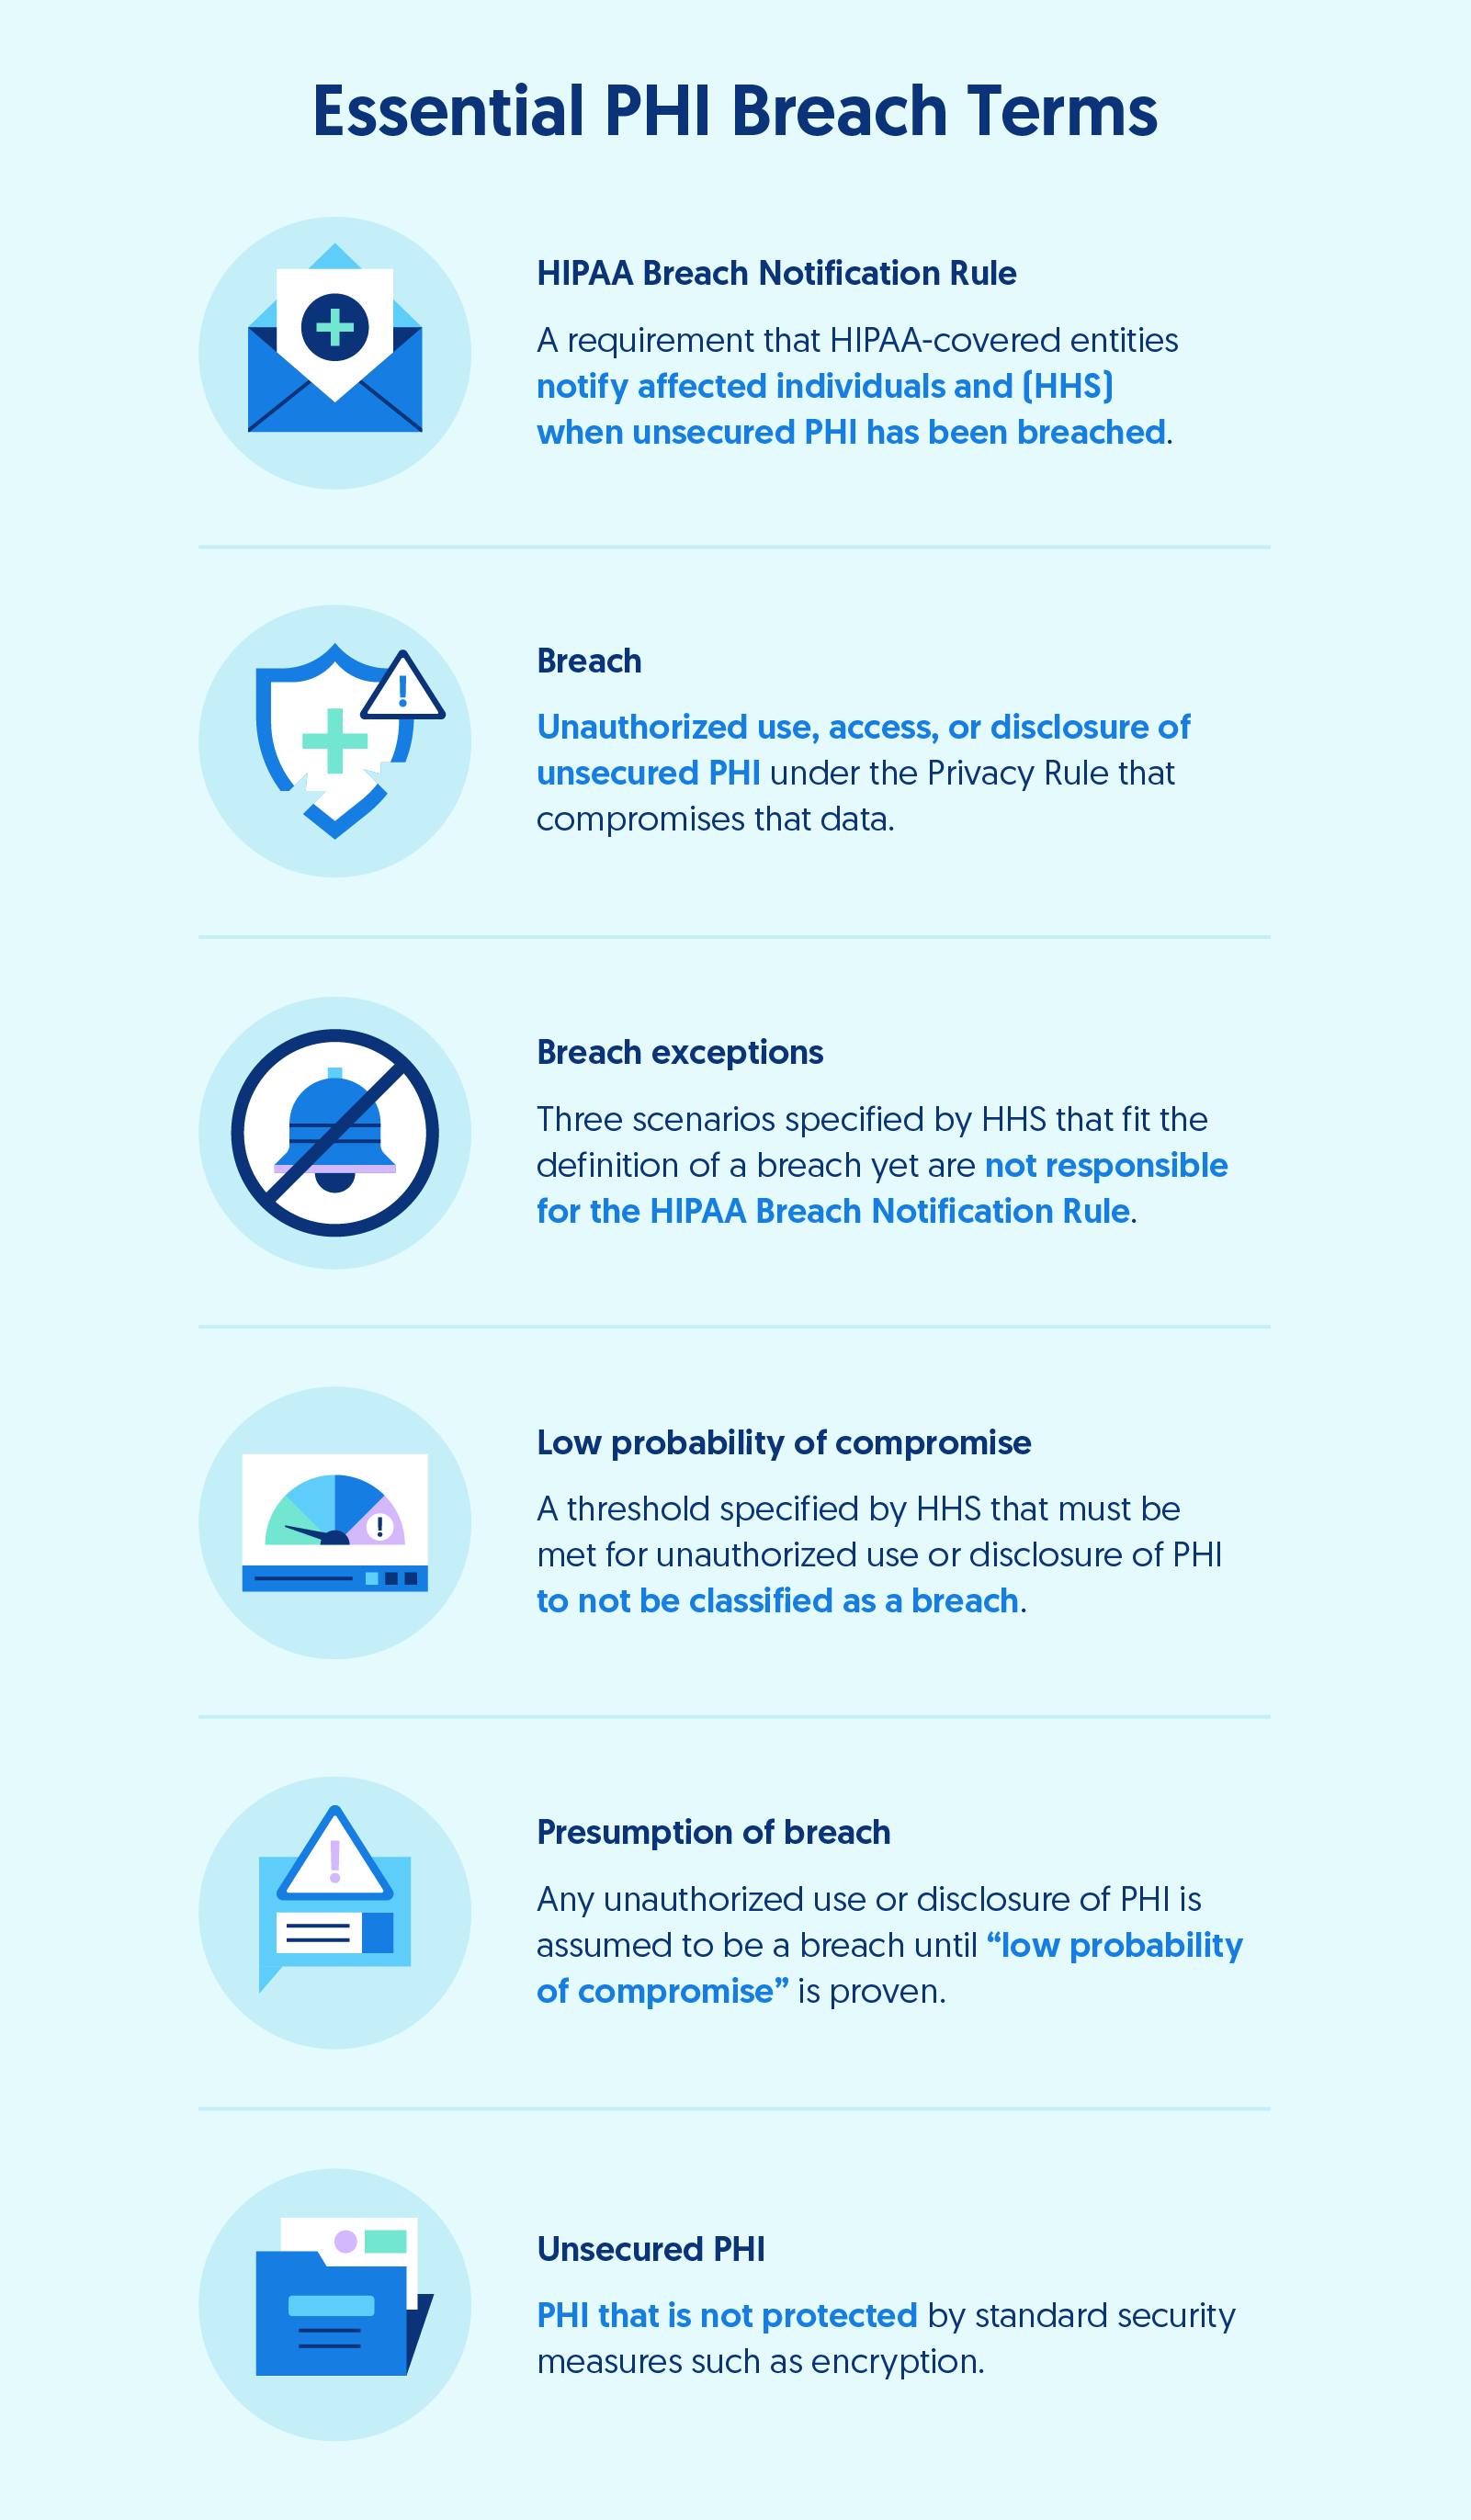 Image including PHI breach terminology, which includes: breach, breach exceptions, low probability of compromise, presumption of breach, and unsecured PHI. 